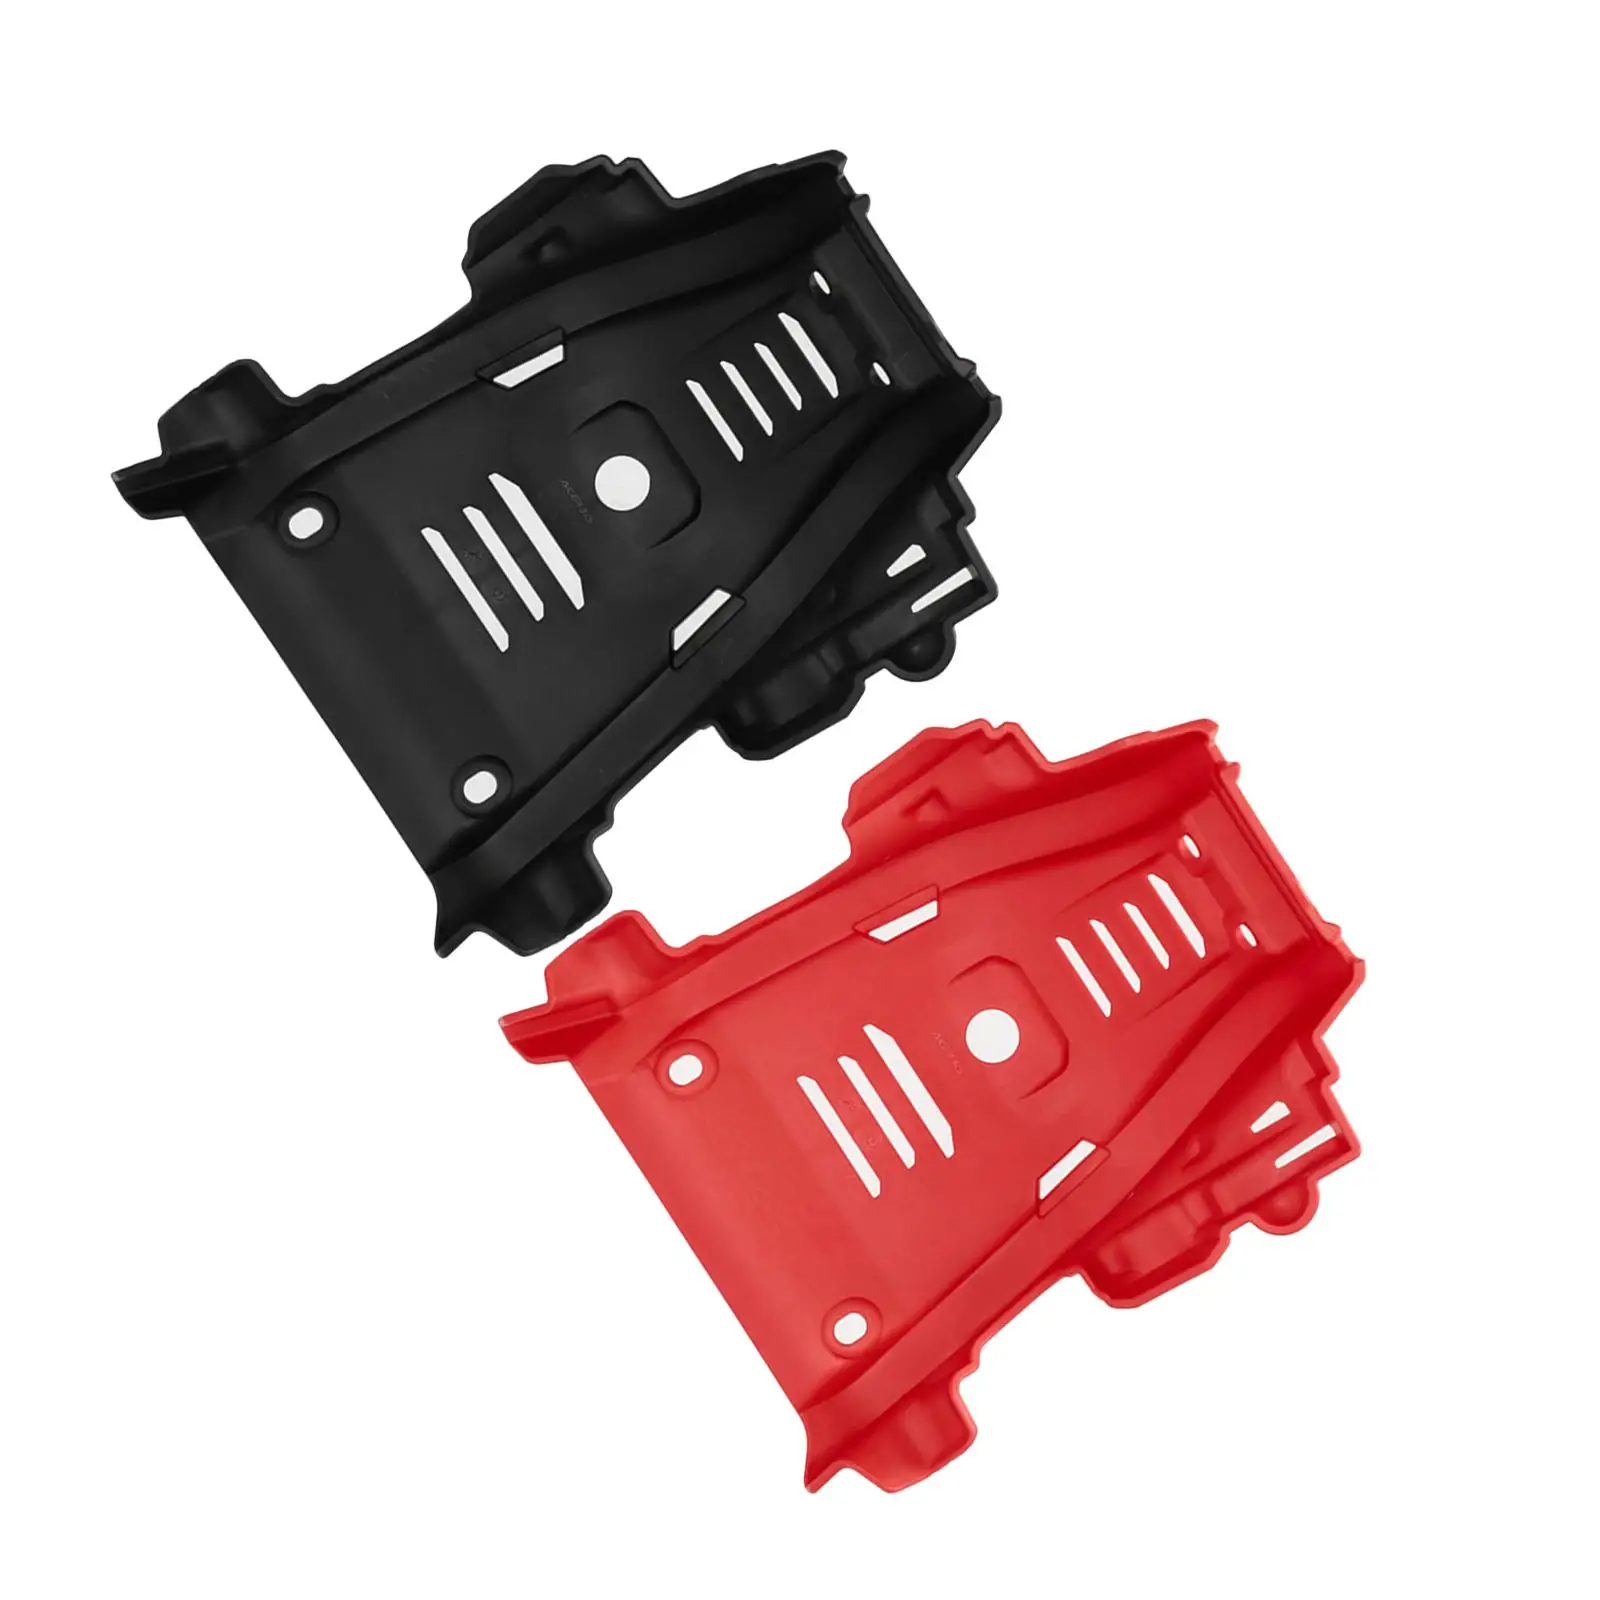 Engine Chassis Guard plate Protective Cover for Crf300L Professional